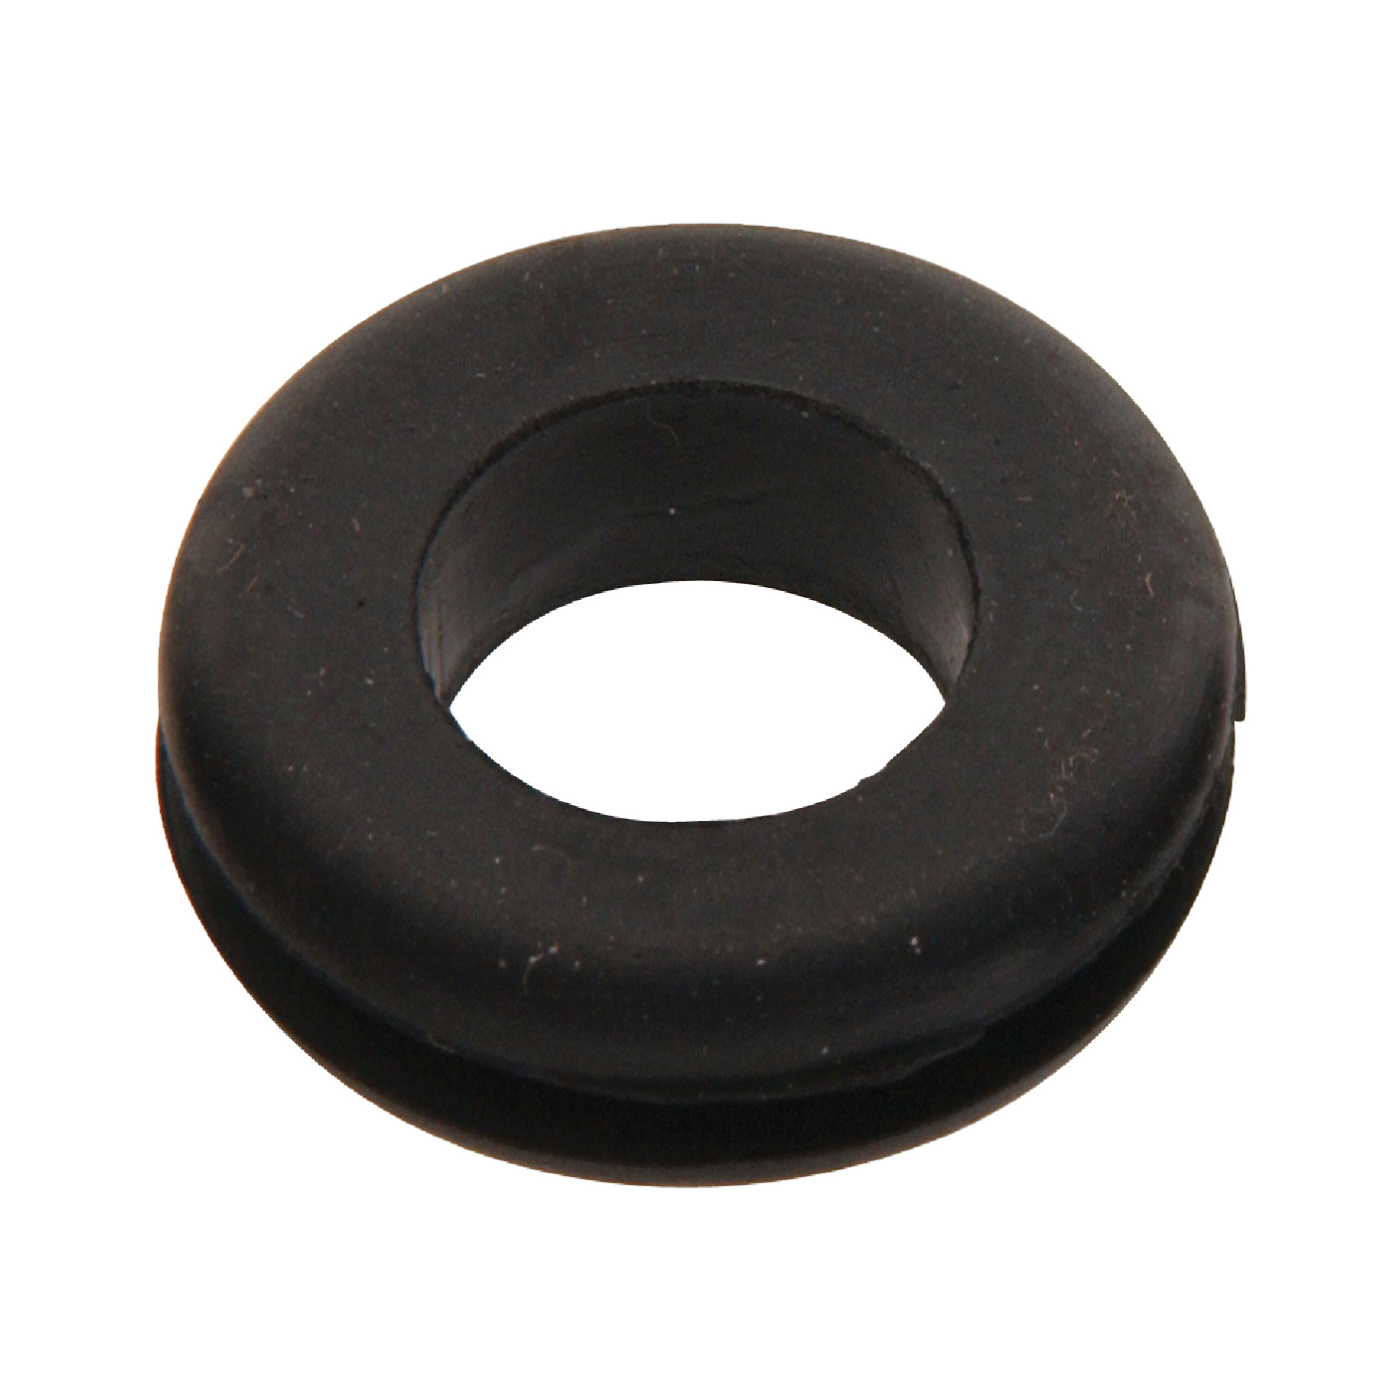 881259 Grommet, Rubber, 3/16 in Thick Panel